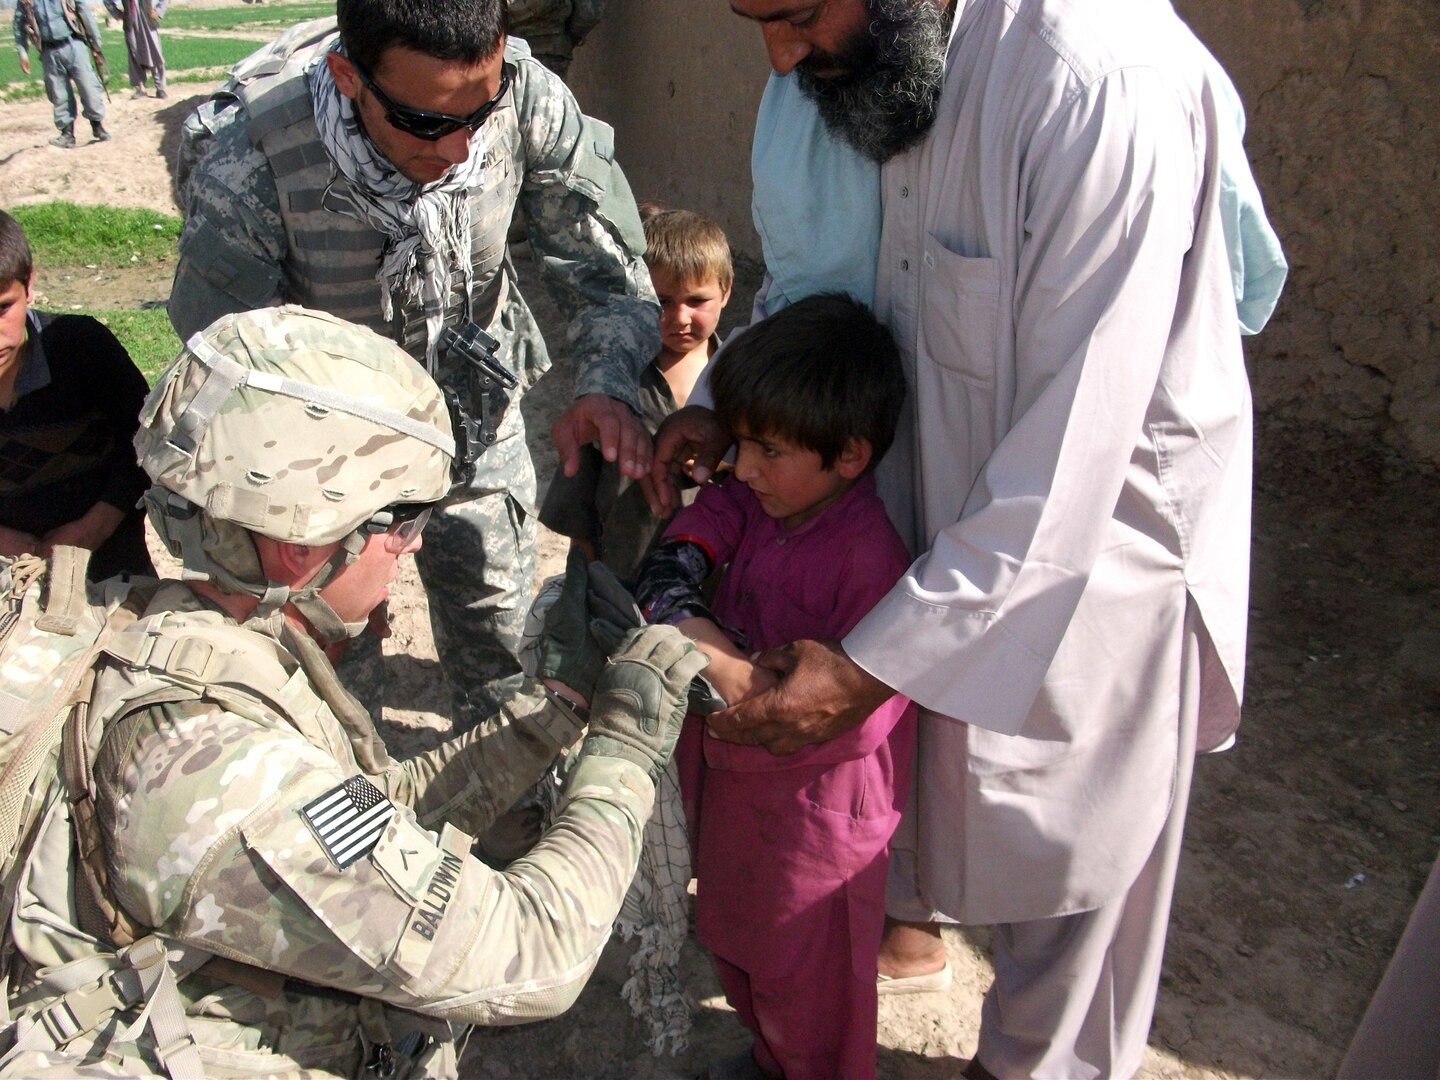 Army Pvt. Eric Baldwin, a medic assigned to Company A, 1st Battalion, 125th Infantry Regiment, 37th Infantry Brigade Combat Team, applies a splint to the arm of an Afghan boy March 23, 2012, as his father holds him still. The Soldiers noticed the boy had an injured arm while conducting a patrol in the Gor Teppa area of Kunduz province, Afghanistan, with the Afghan National Police. The 37th IBCT is deployed to northern Afghanistan in support of the International Security Assistance Force in an effort to build ANP capacity.